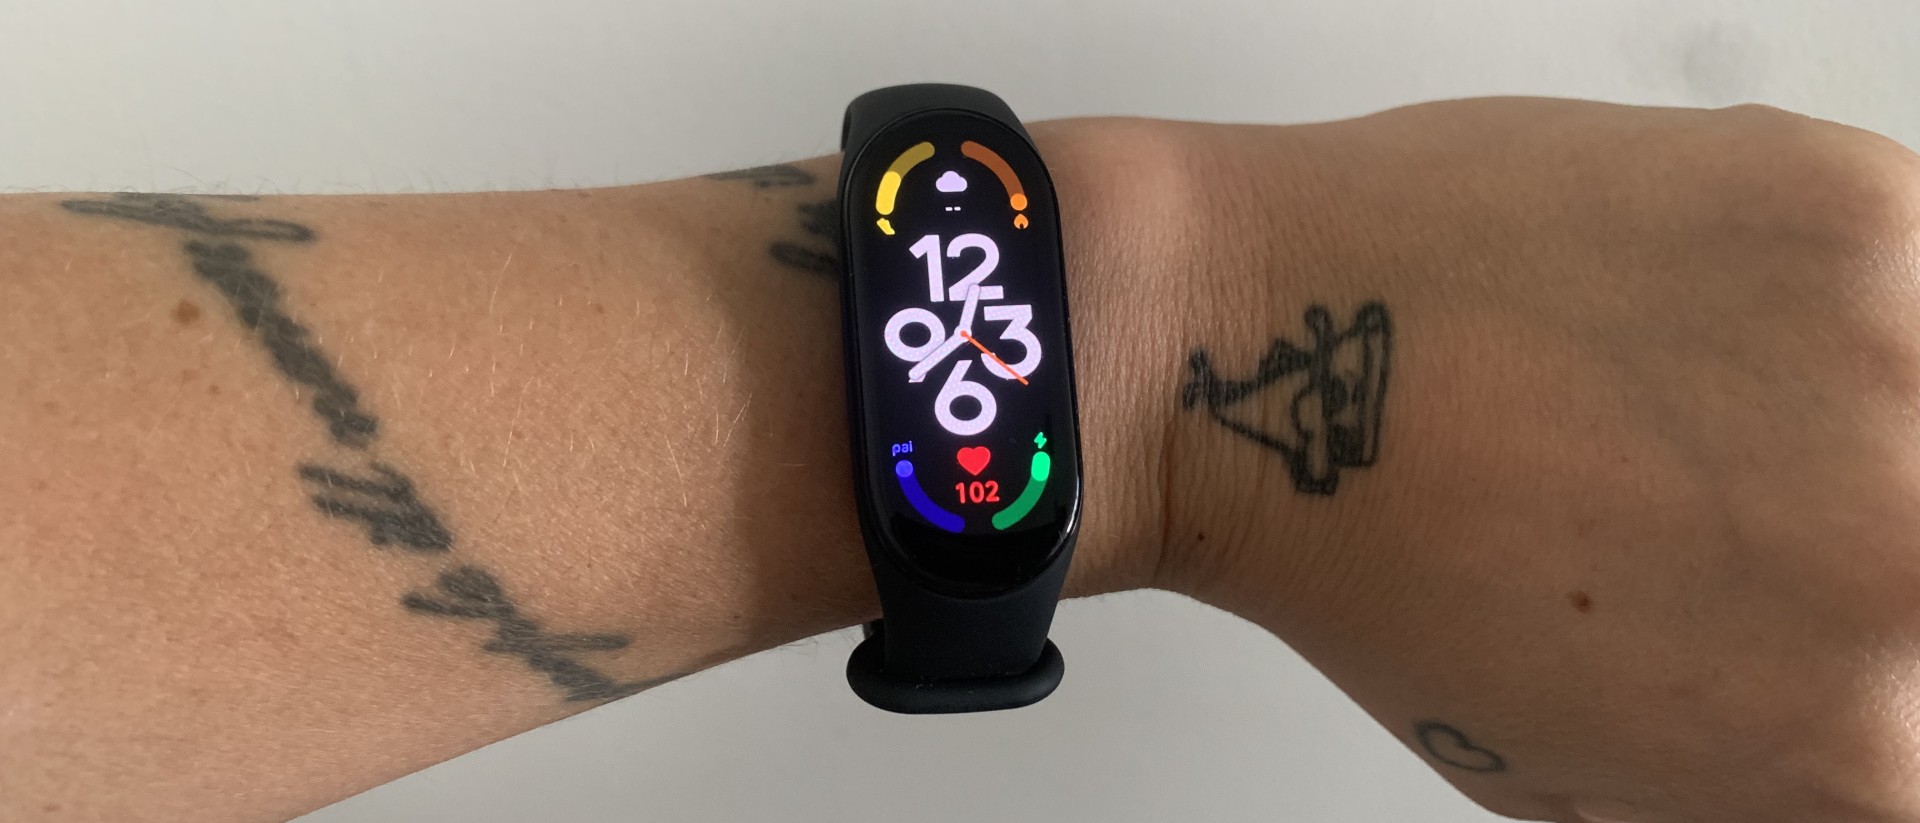 Xiaomi Mi Band 2 review: A super low-cost heart rate fitness band